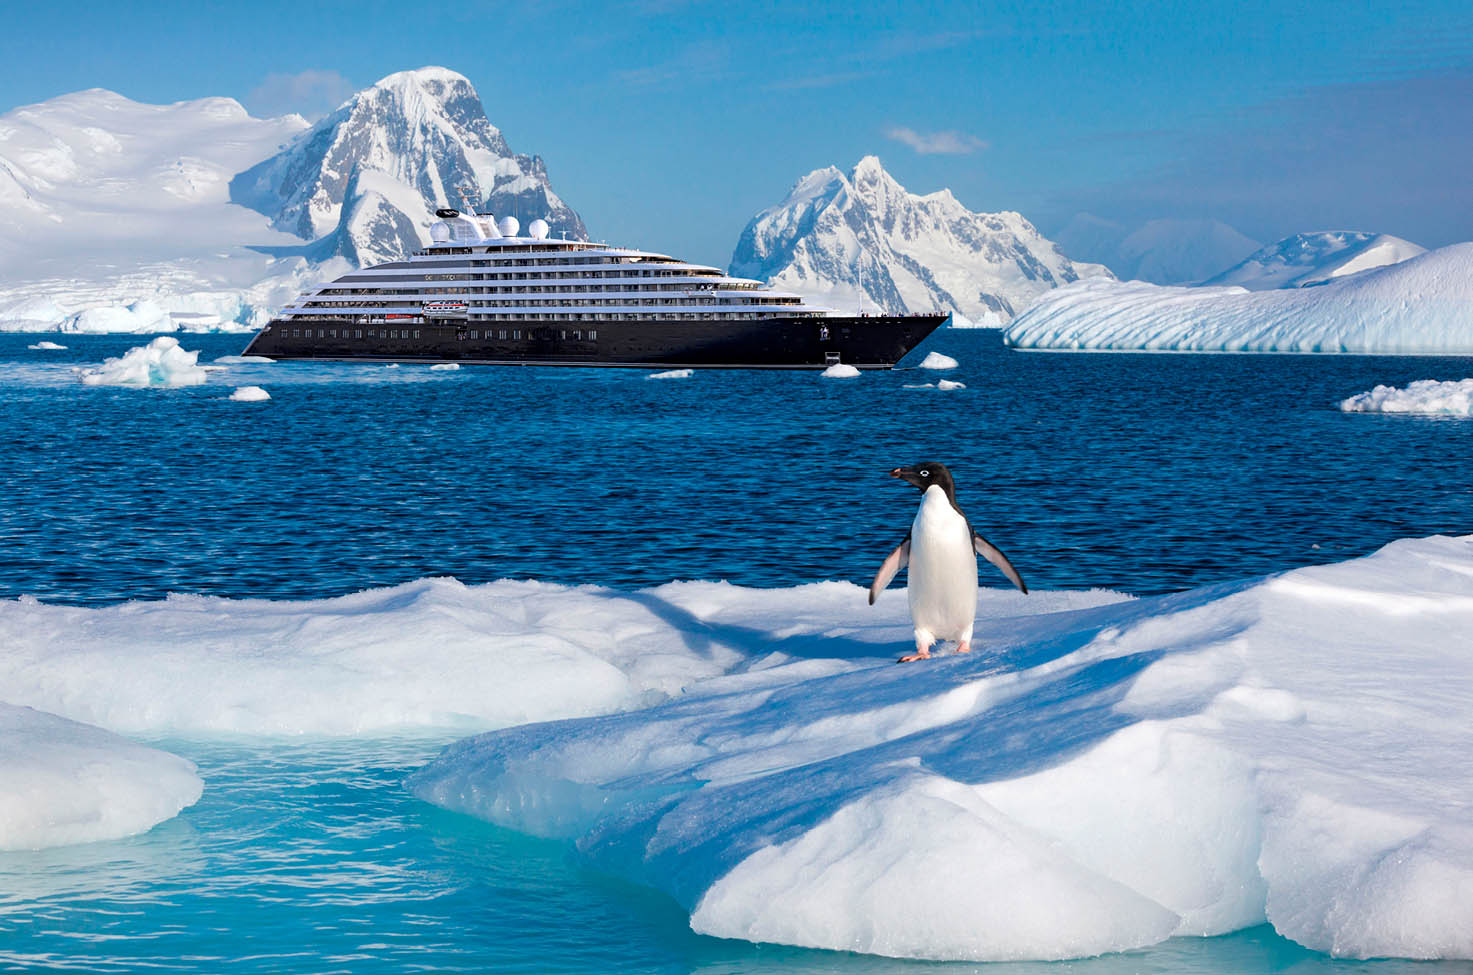 Penguin in foreground on an iceberg with discovery yacht sailing past in the background whilst a blue sky